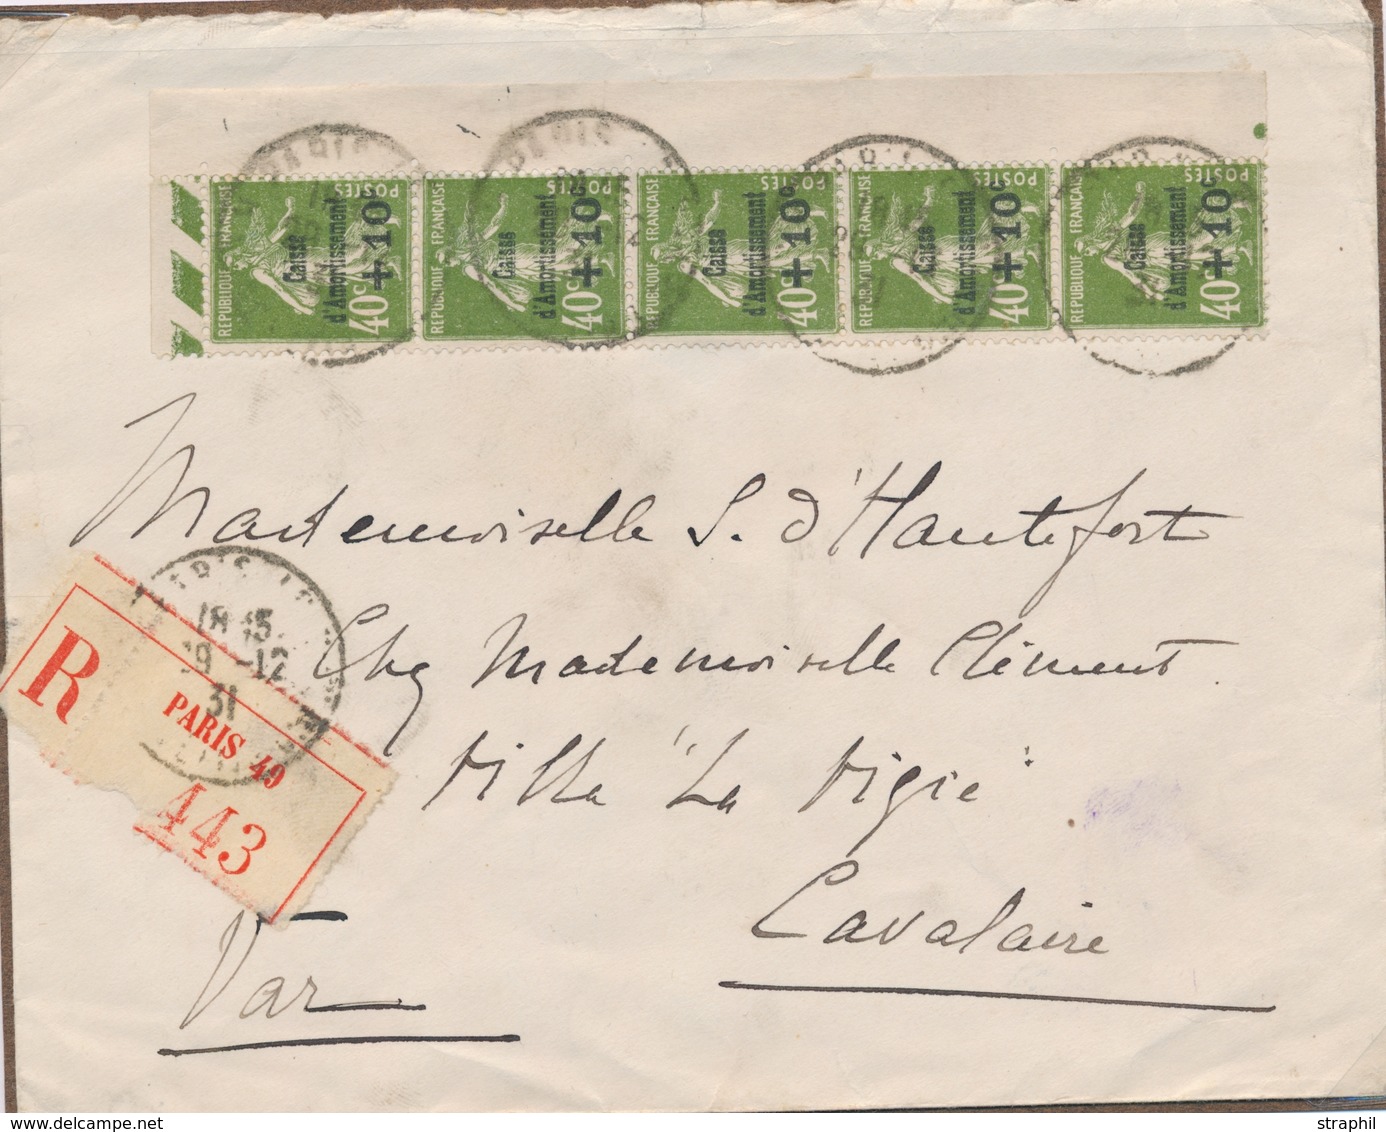 L CA Sur Lettre - L - N°253 - Bde De 5 - Cdf - S/pli Recom. 28/12/31 De Paris Pr Cavalaire - TB - Covers & Documents